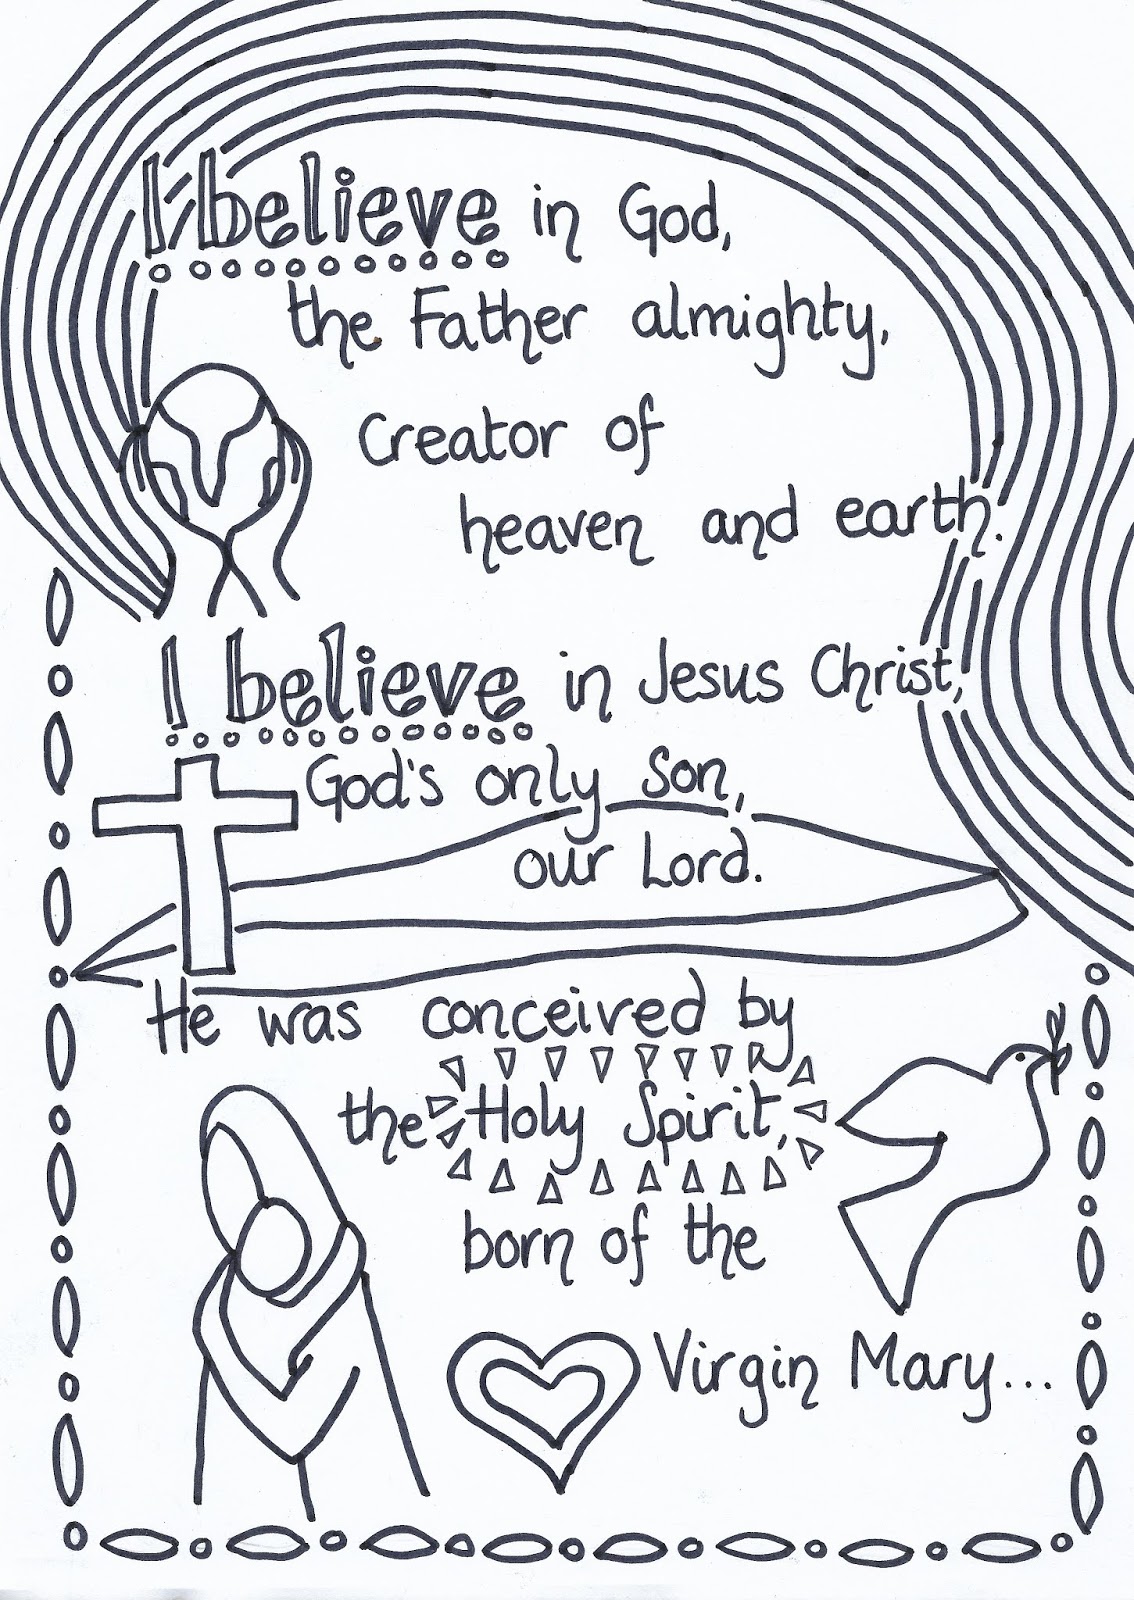 Apostles Creed Coloring Page Coloring Pages